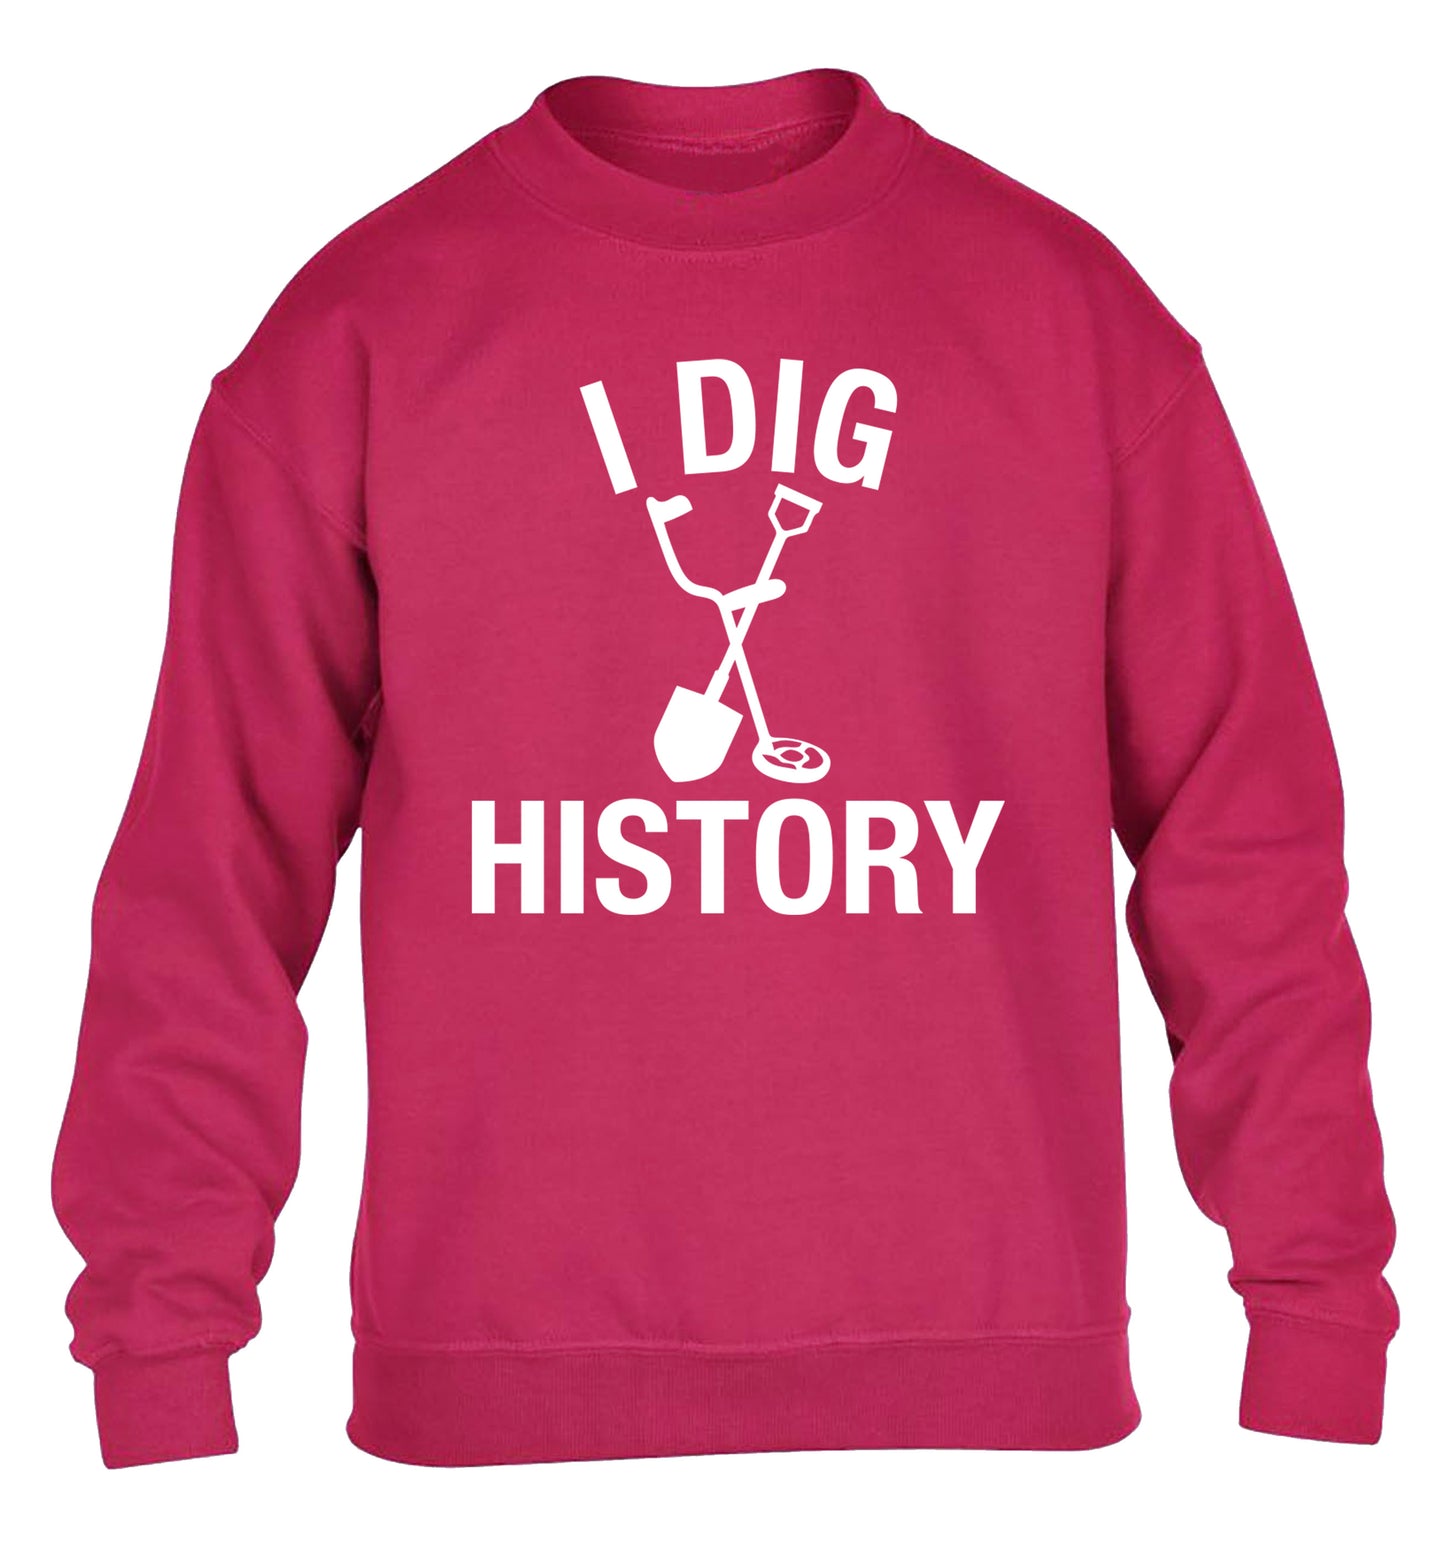 I dig history children's pink sweater 12-13 Years